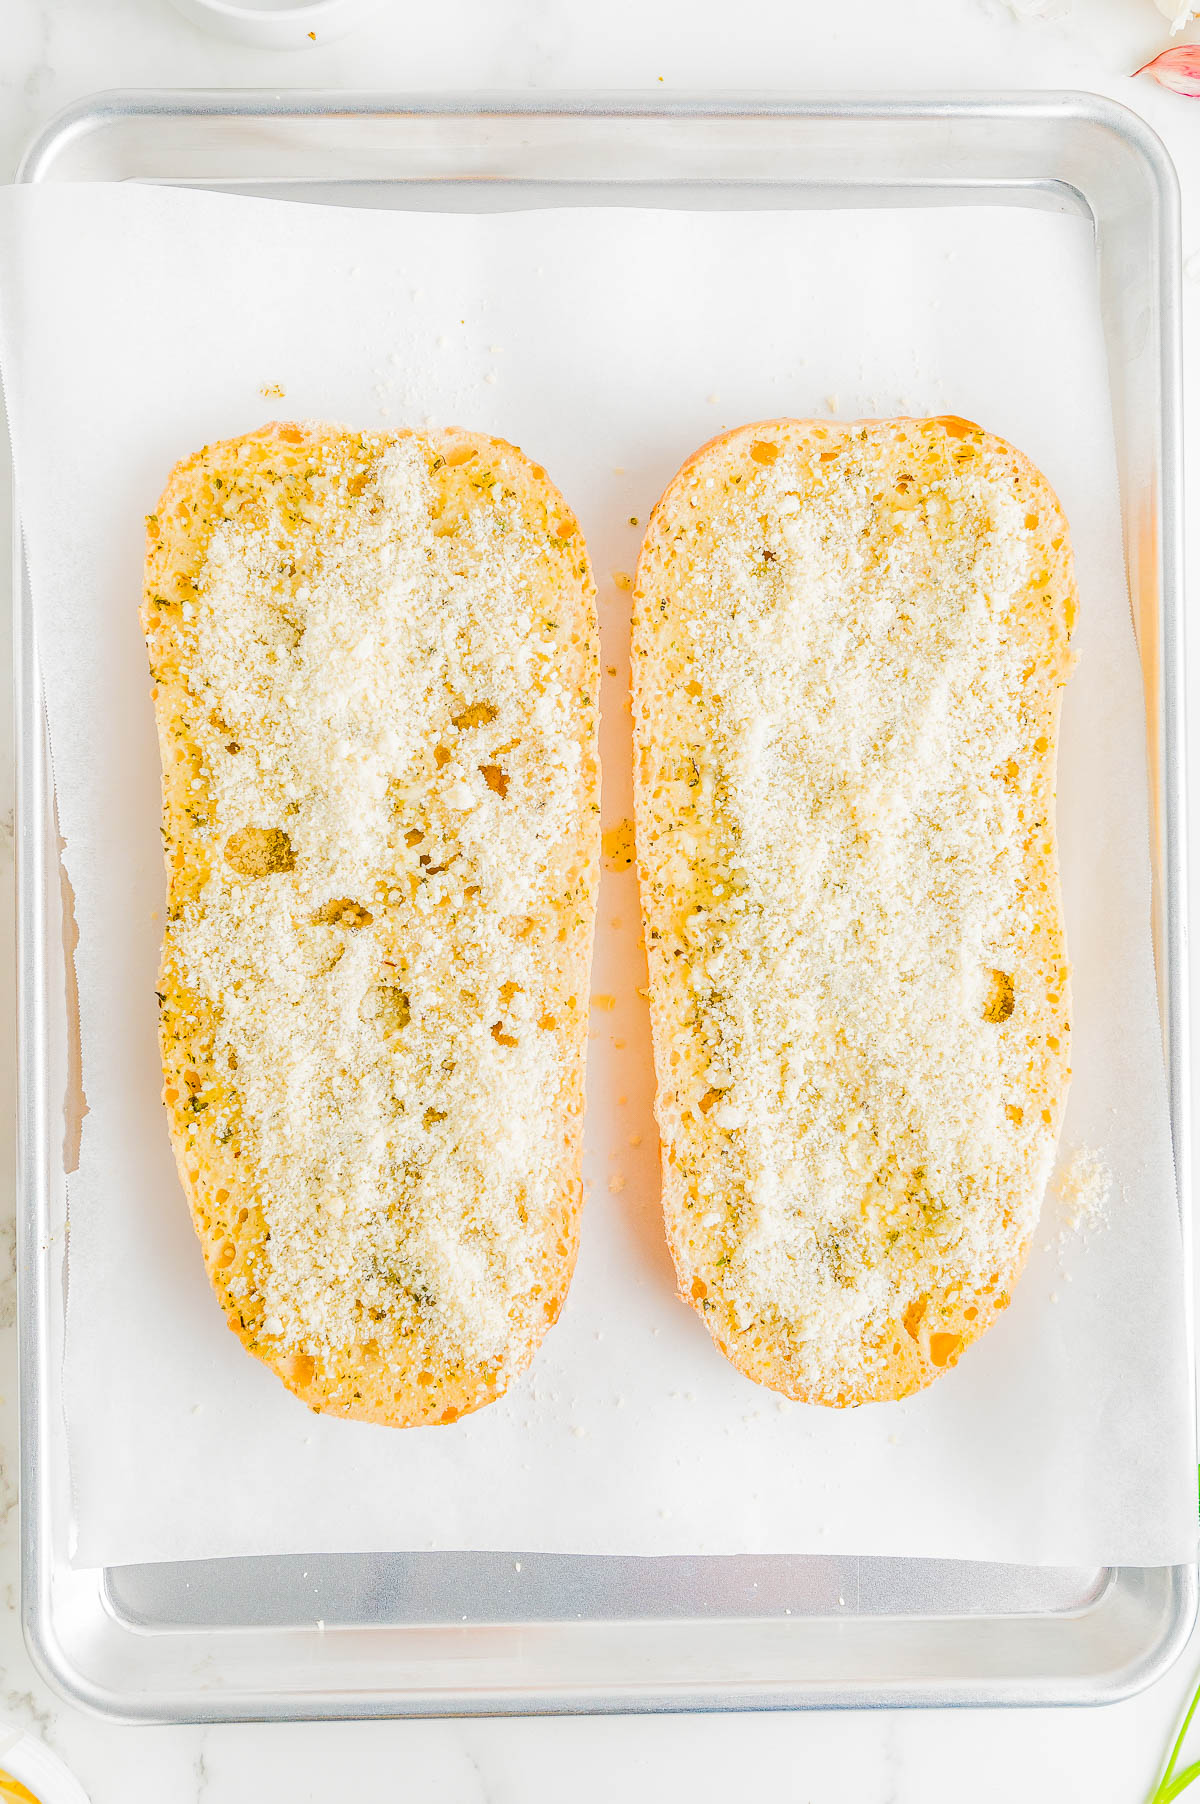 Easy Cheesy Garlic Bread - French bread that's been brushed with melted garlic butter and Italian seasoning, then topped with mounds of mozzarella and Parmesan cheeses, and baked to perfection is what this EASY appetizer, snack, or side is all about! Garlic bread with cheese is a family favorite that no one can resist and ready in just 15 minutes!